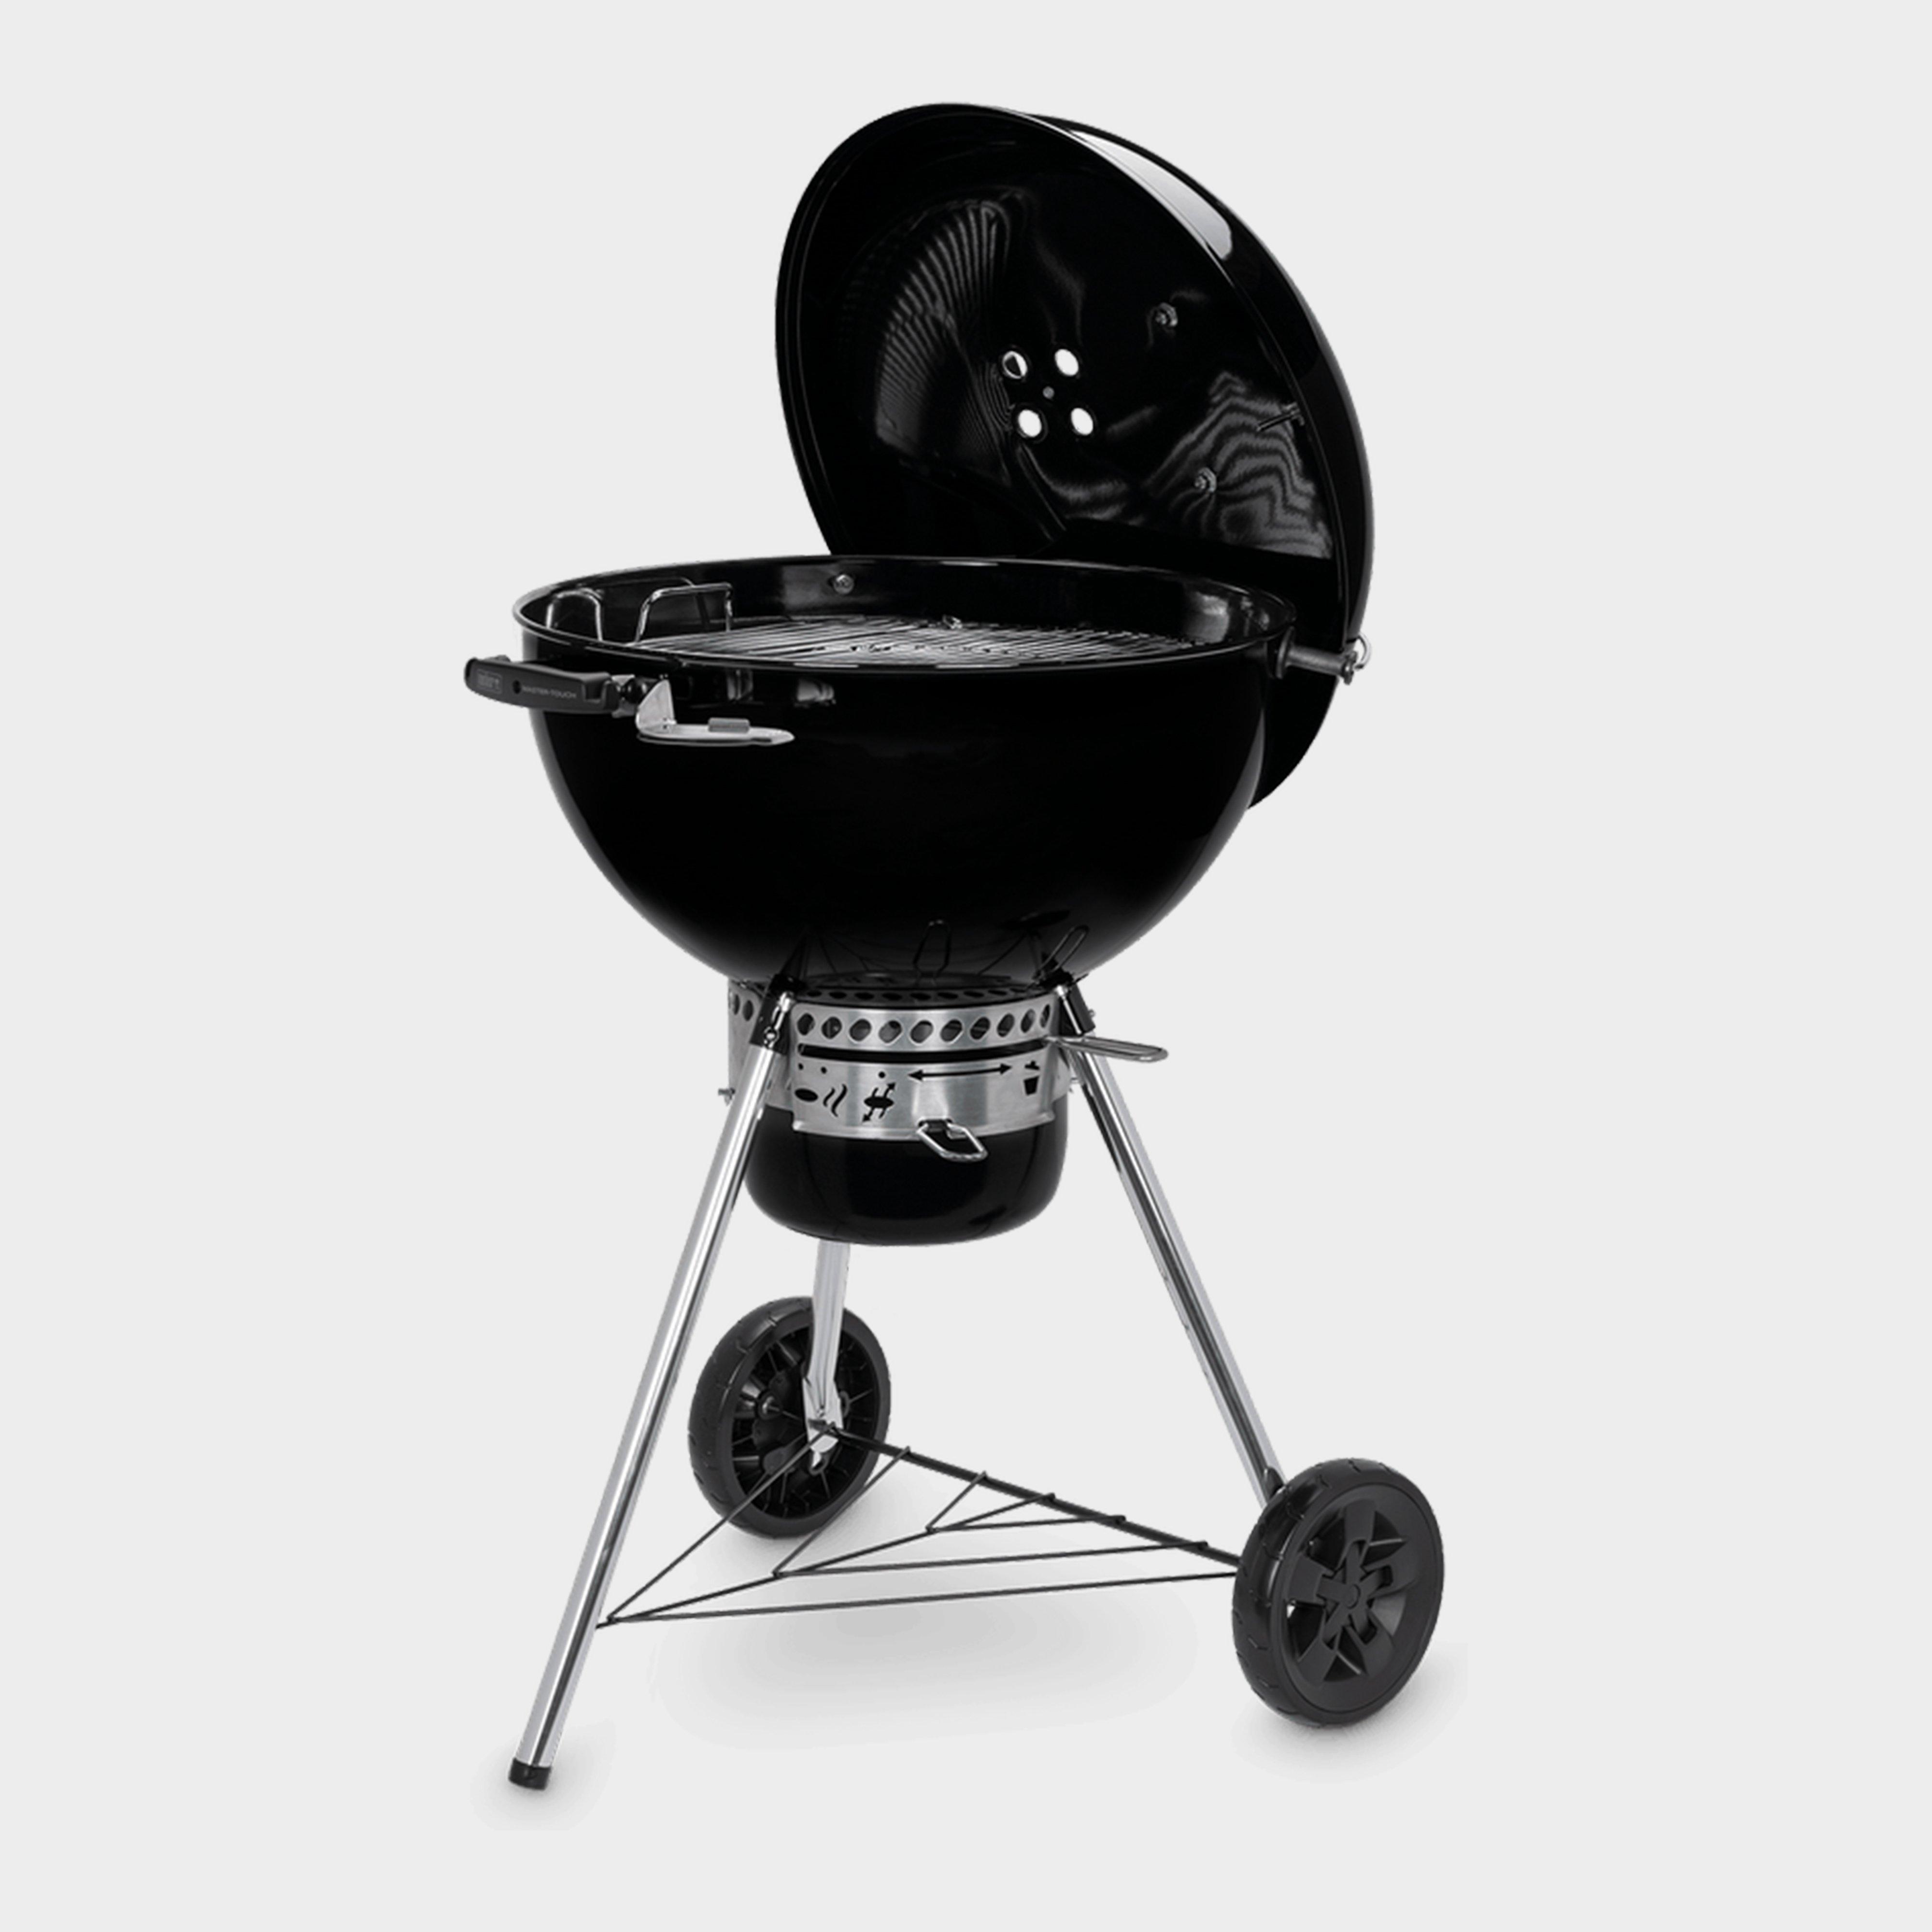 Weber Weber Master-Touch Gbs E-5750 Charcoal Barbecue 57 Cm - Black, Black